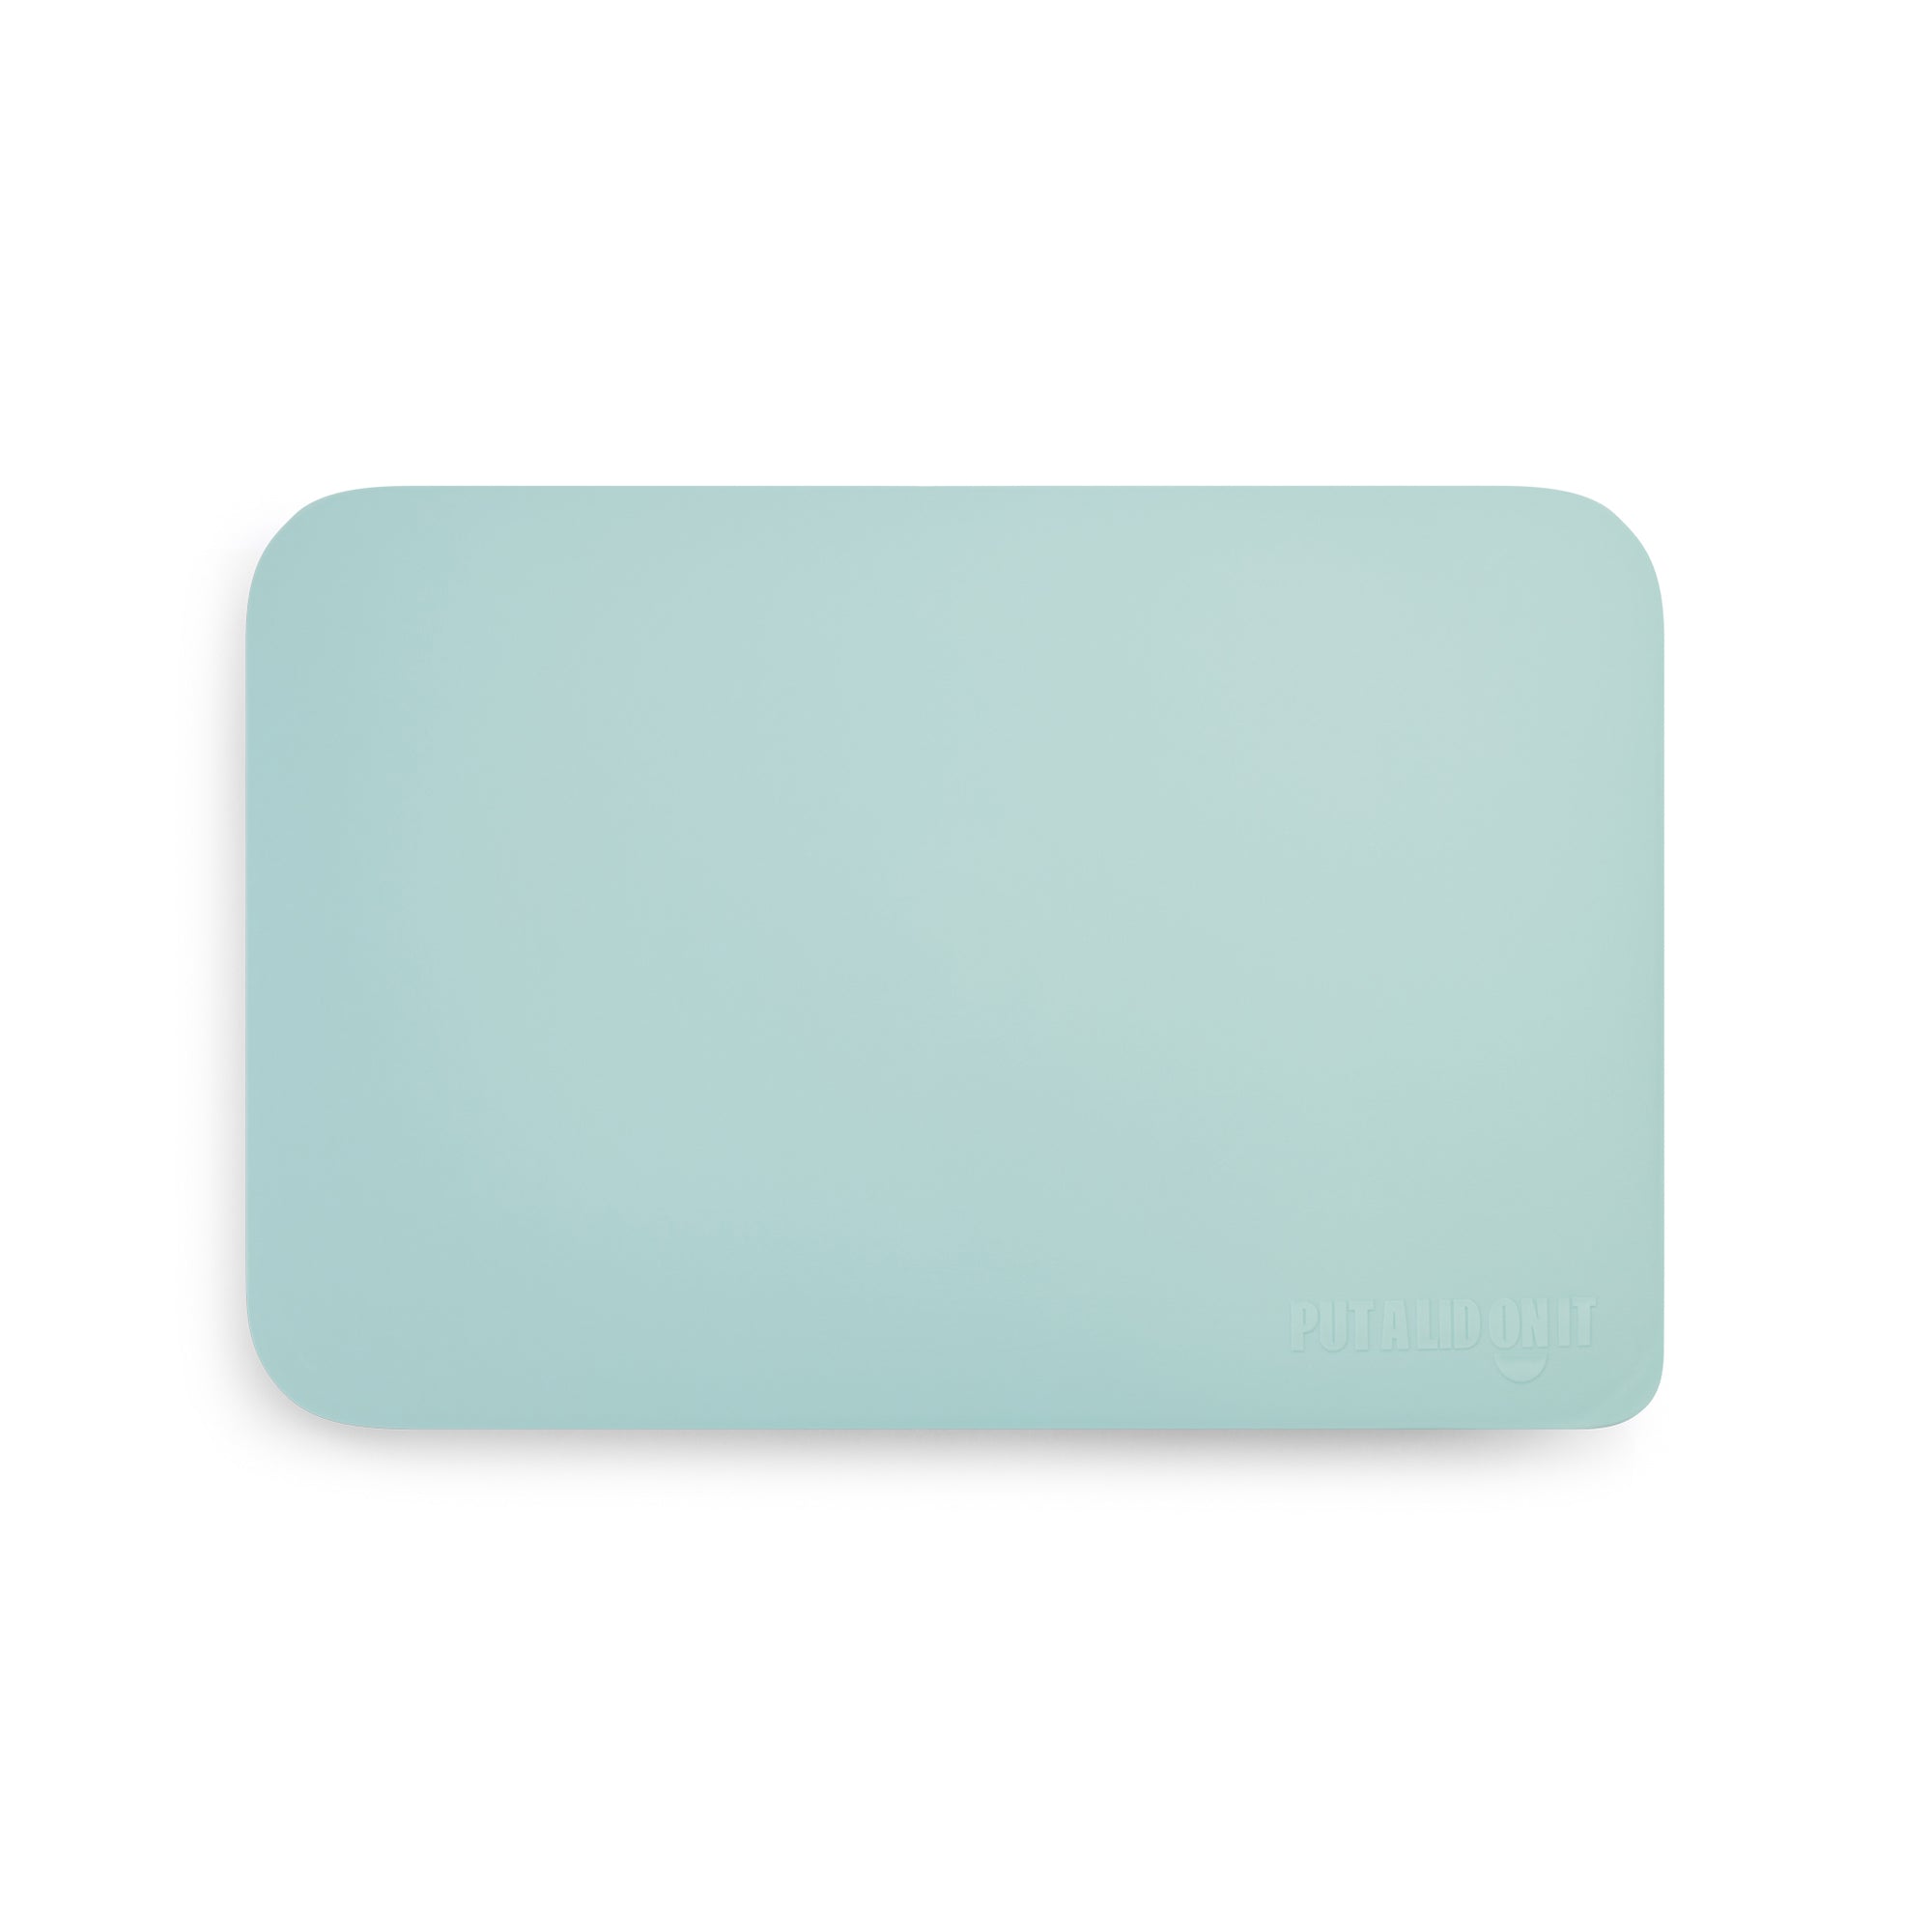 Put a lid on it - Serving platter with a lid - Mint